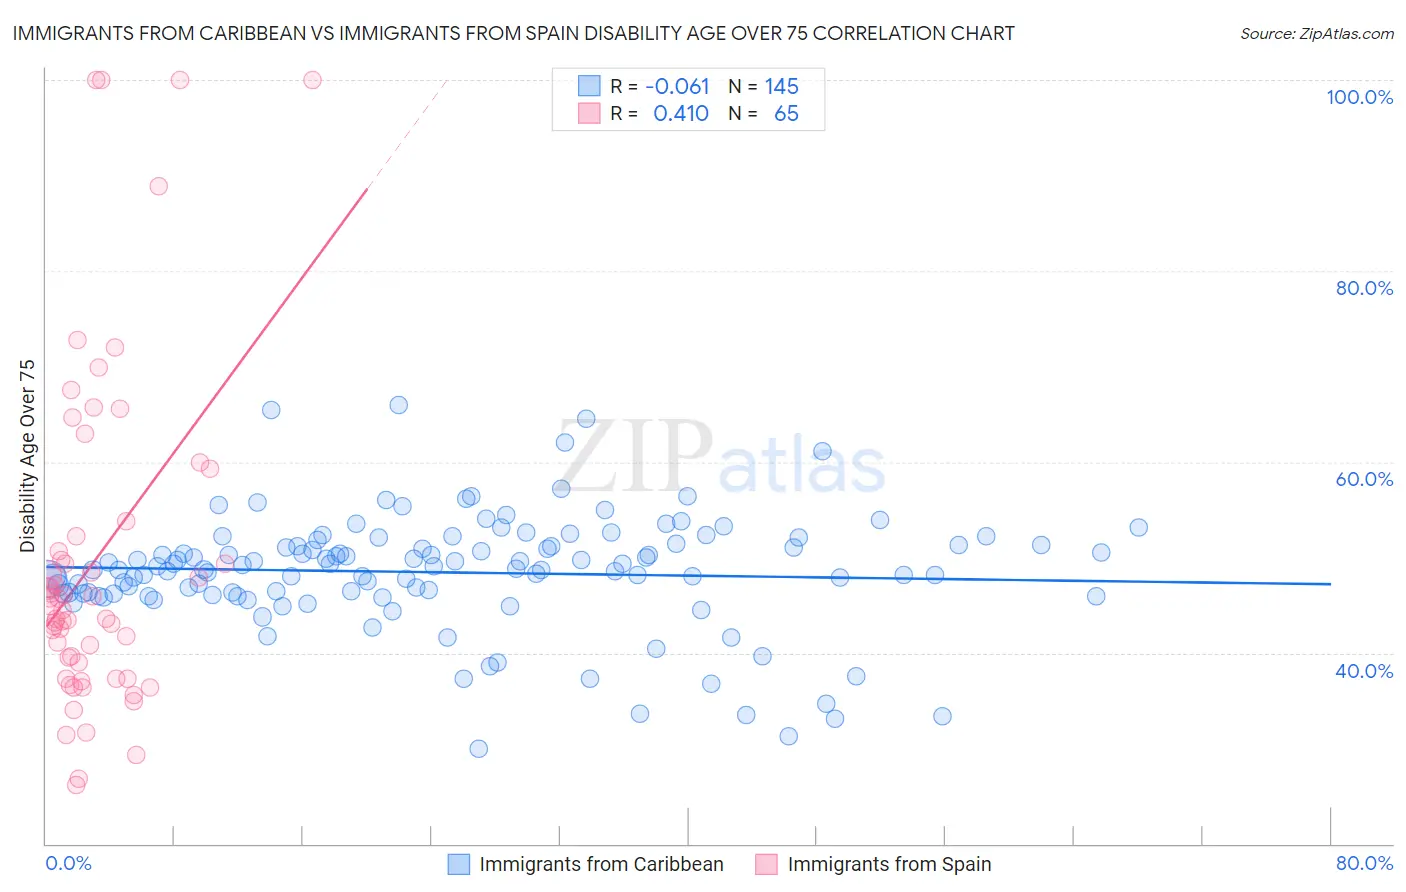 Immigrants from Caribbean vs Immigrants from Spain Disability Age Over 75